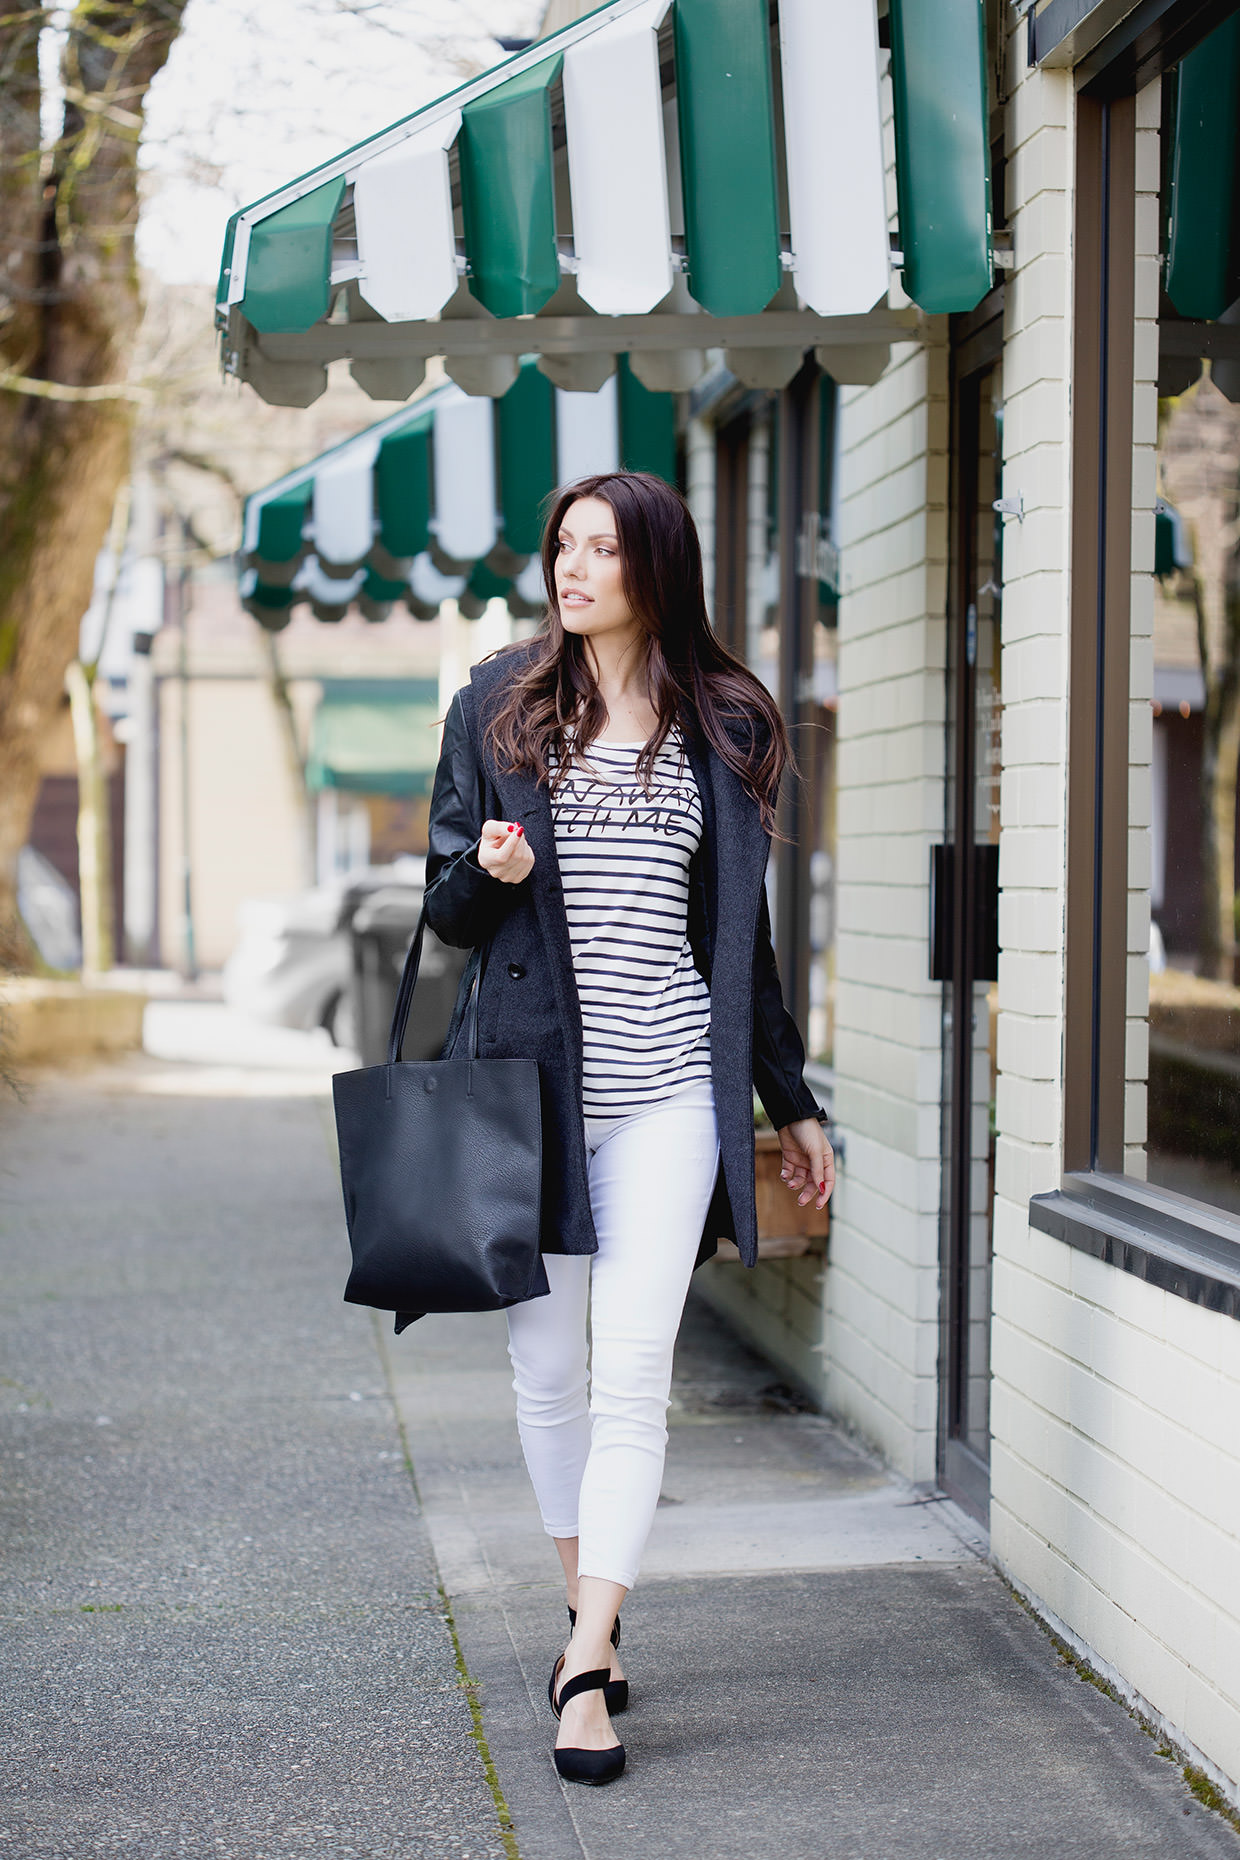 Silver Icing: Striped Shirt Outfits You'll Want to Copy